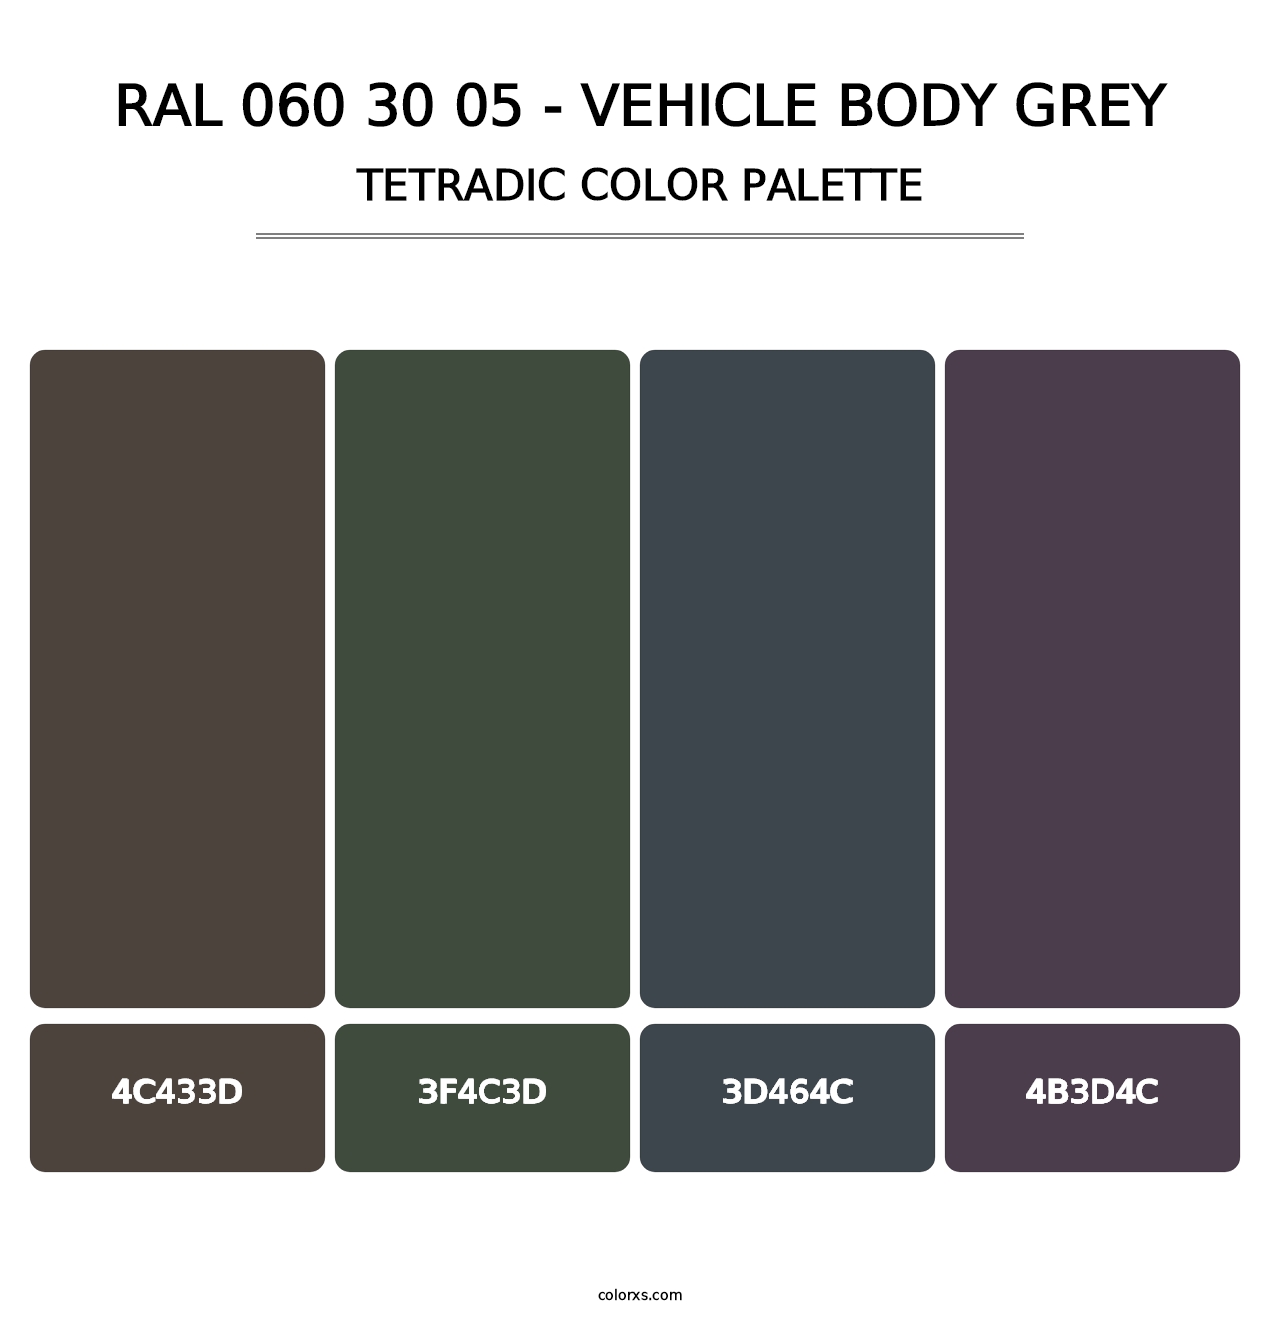 RAL 060 30 05 - Vehicle Body Grey - Tetradic Color Palette